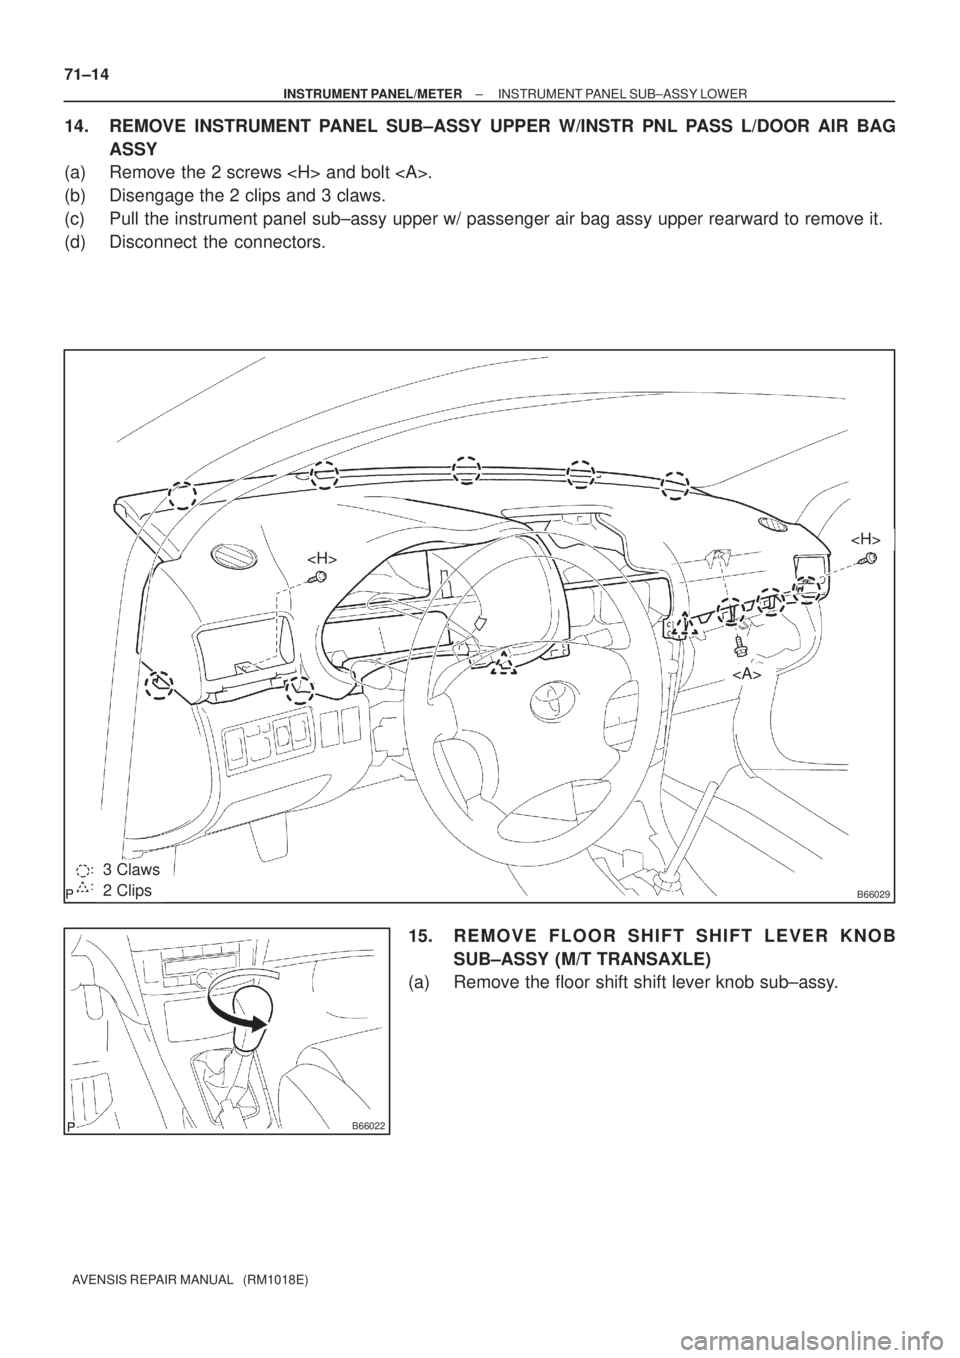 TOYOTA AVENSIS 2005  Service Repair Manual B660292 Clips
3 Claws
<H>
<H>
<A>
B66022
71±14
± INSTRUMENT PANEL/METERINSTRUMENT PANEL SUB±ASSY LOWER
AVENSIS REPAIR MANUAL   (RM1018E)
14. REMOVE INSTRUMENT PANEL SUB±ASSY UPPER W/INSTR PNL PASS